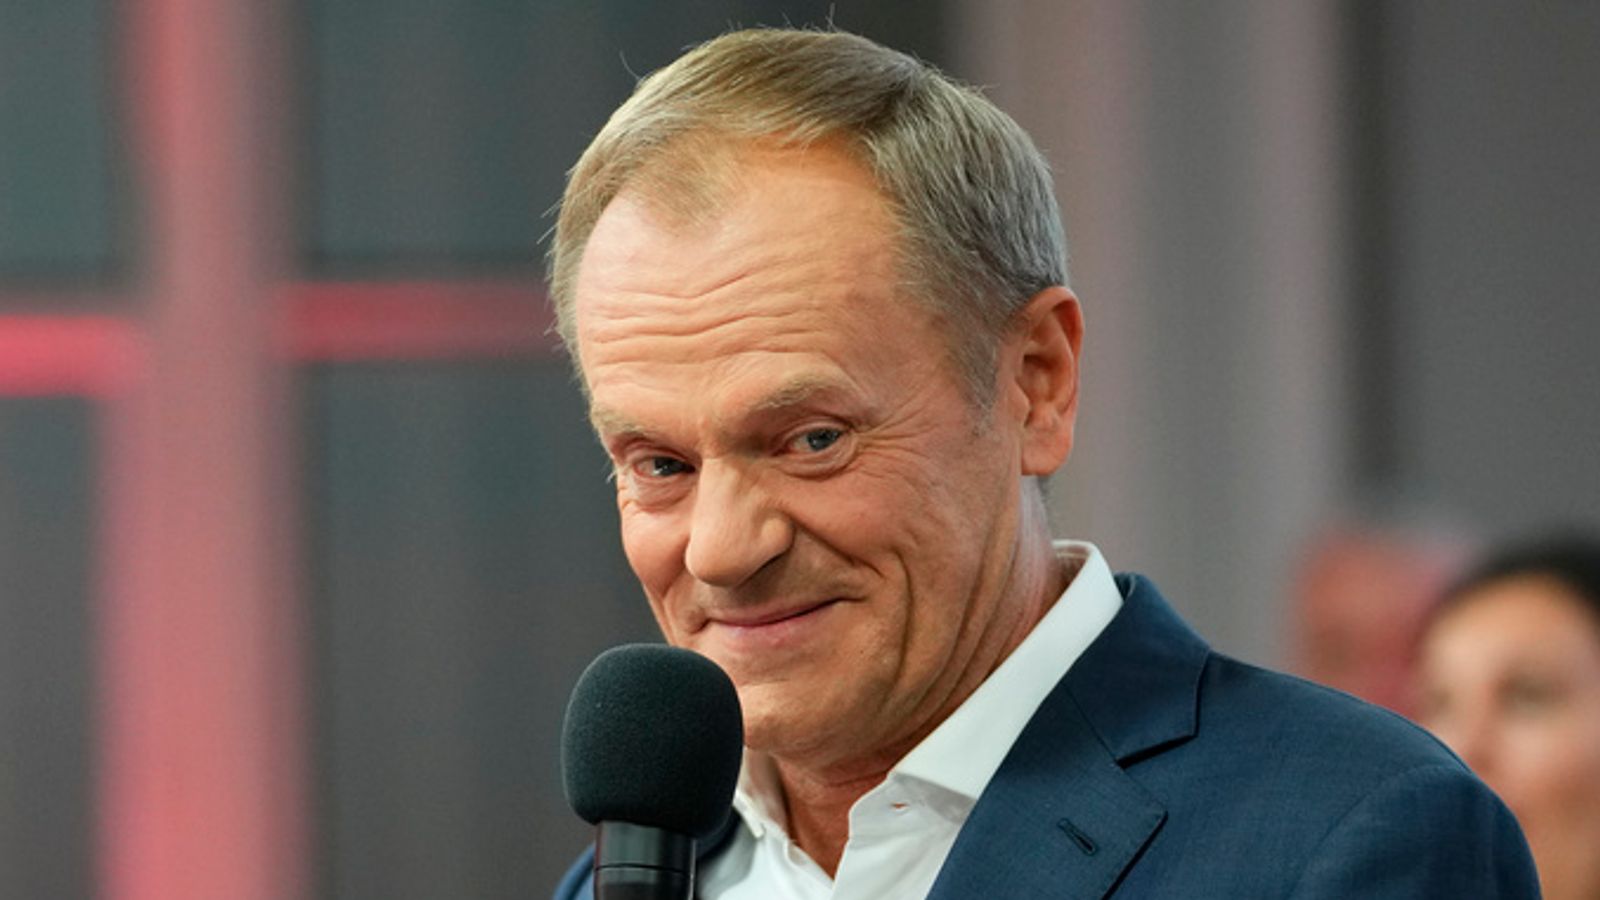 Donald Tusk has bucked Europe's populist trend - but faces a daunting agenda as Poland's new prime minister